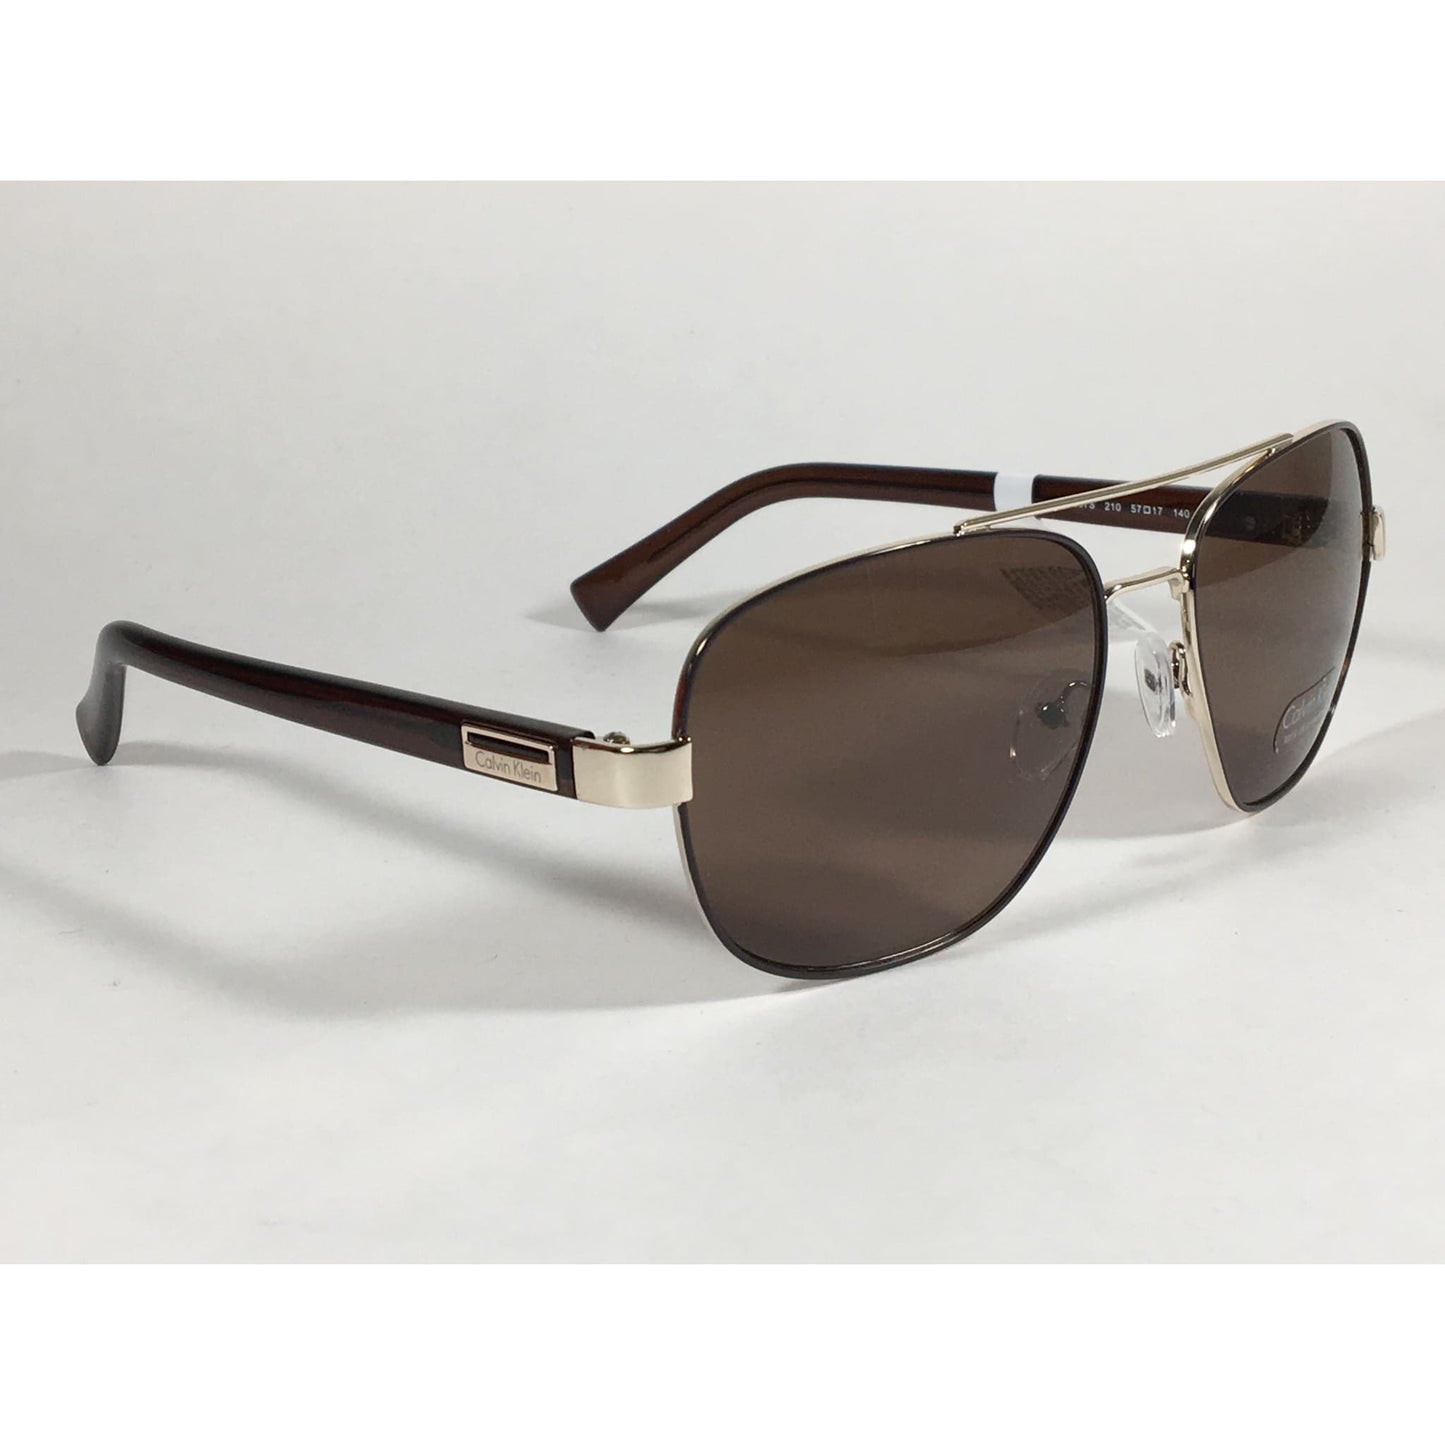 Calvin Klein R357S 210 Aviator Pilot Sunglasses Gold And Brown Frame With Brown Lens - Sunglasses